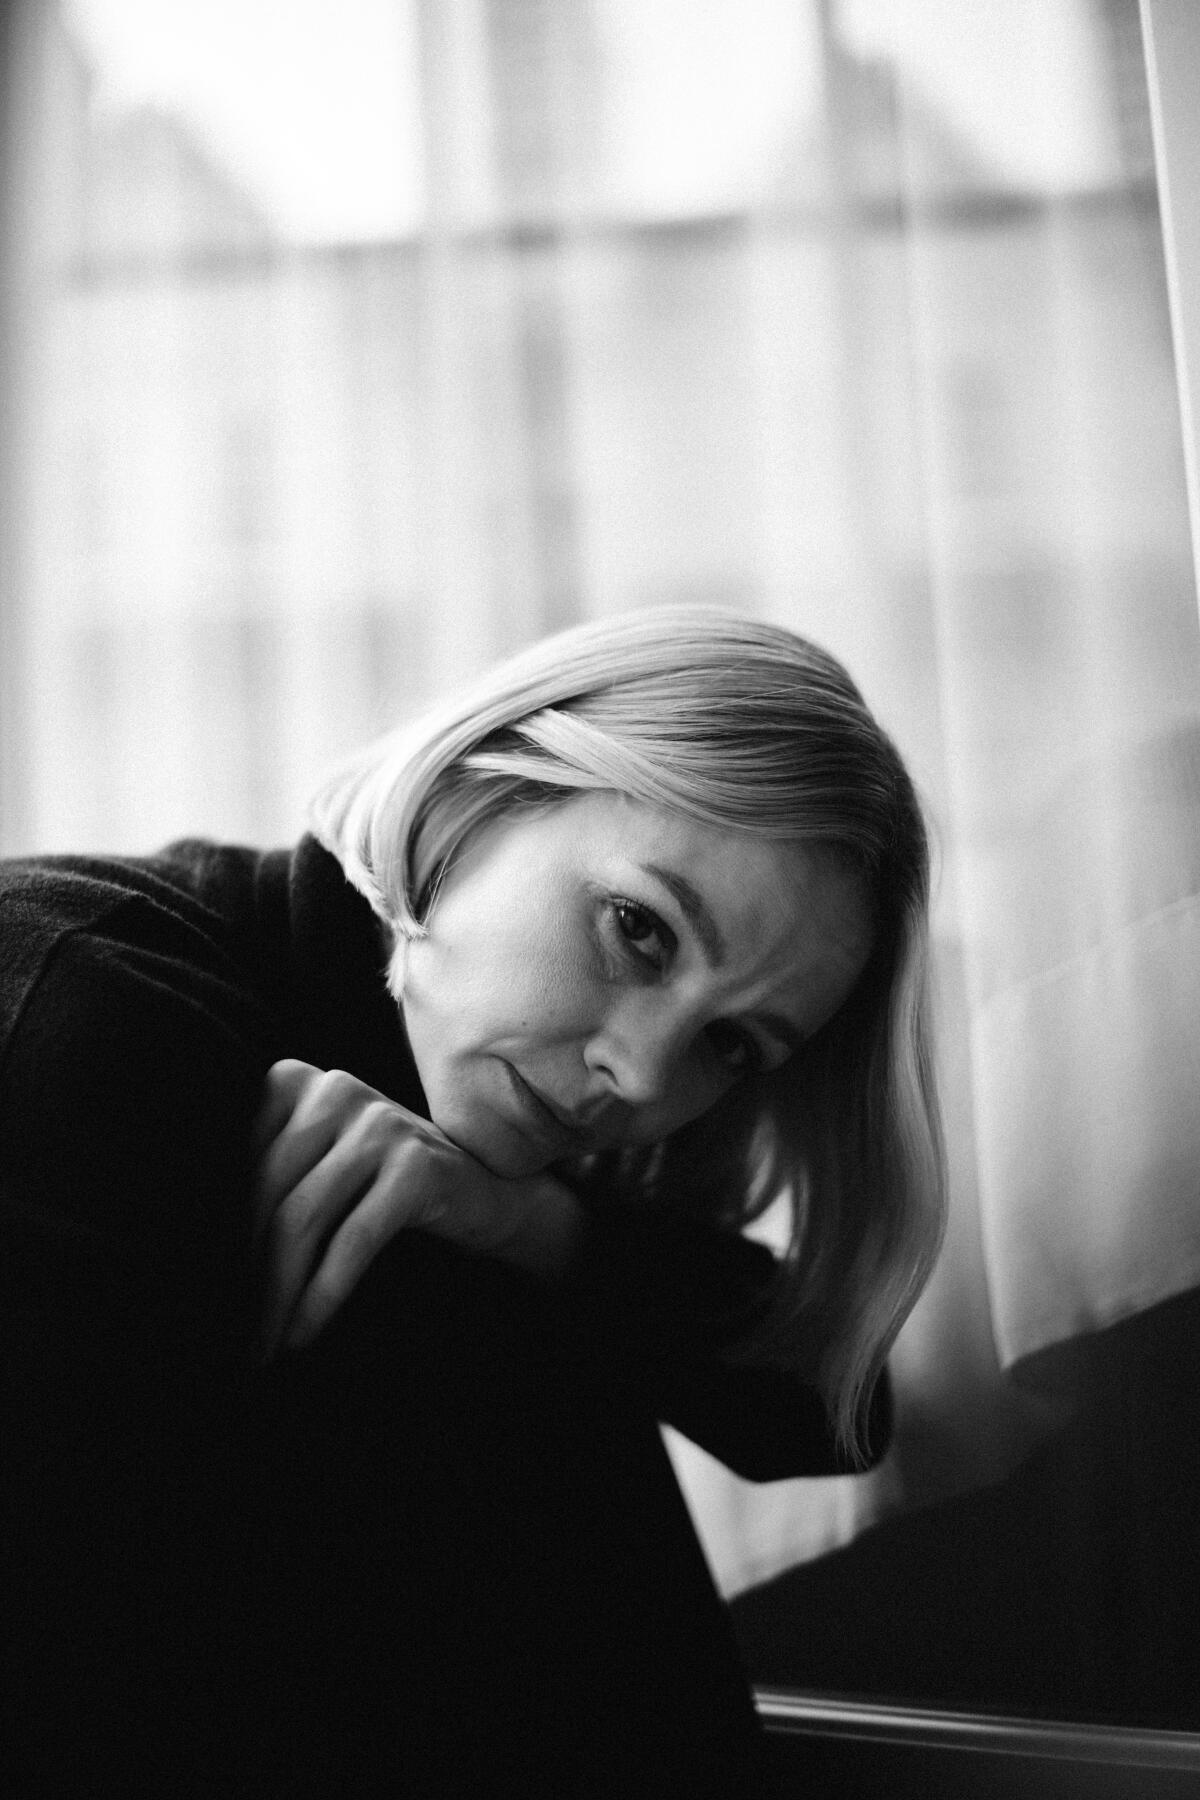 Carey Mulligan leans her chin on her arms in a black-and-white portrait.